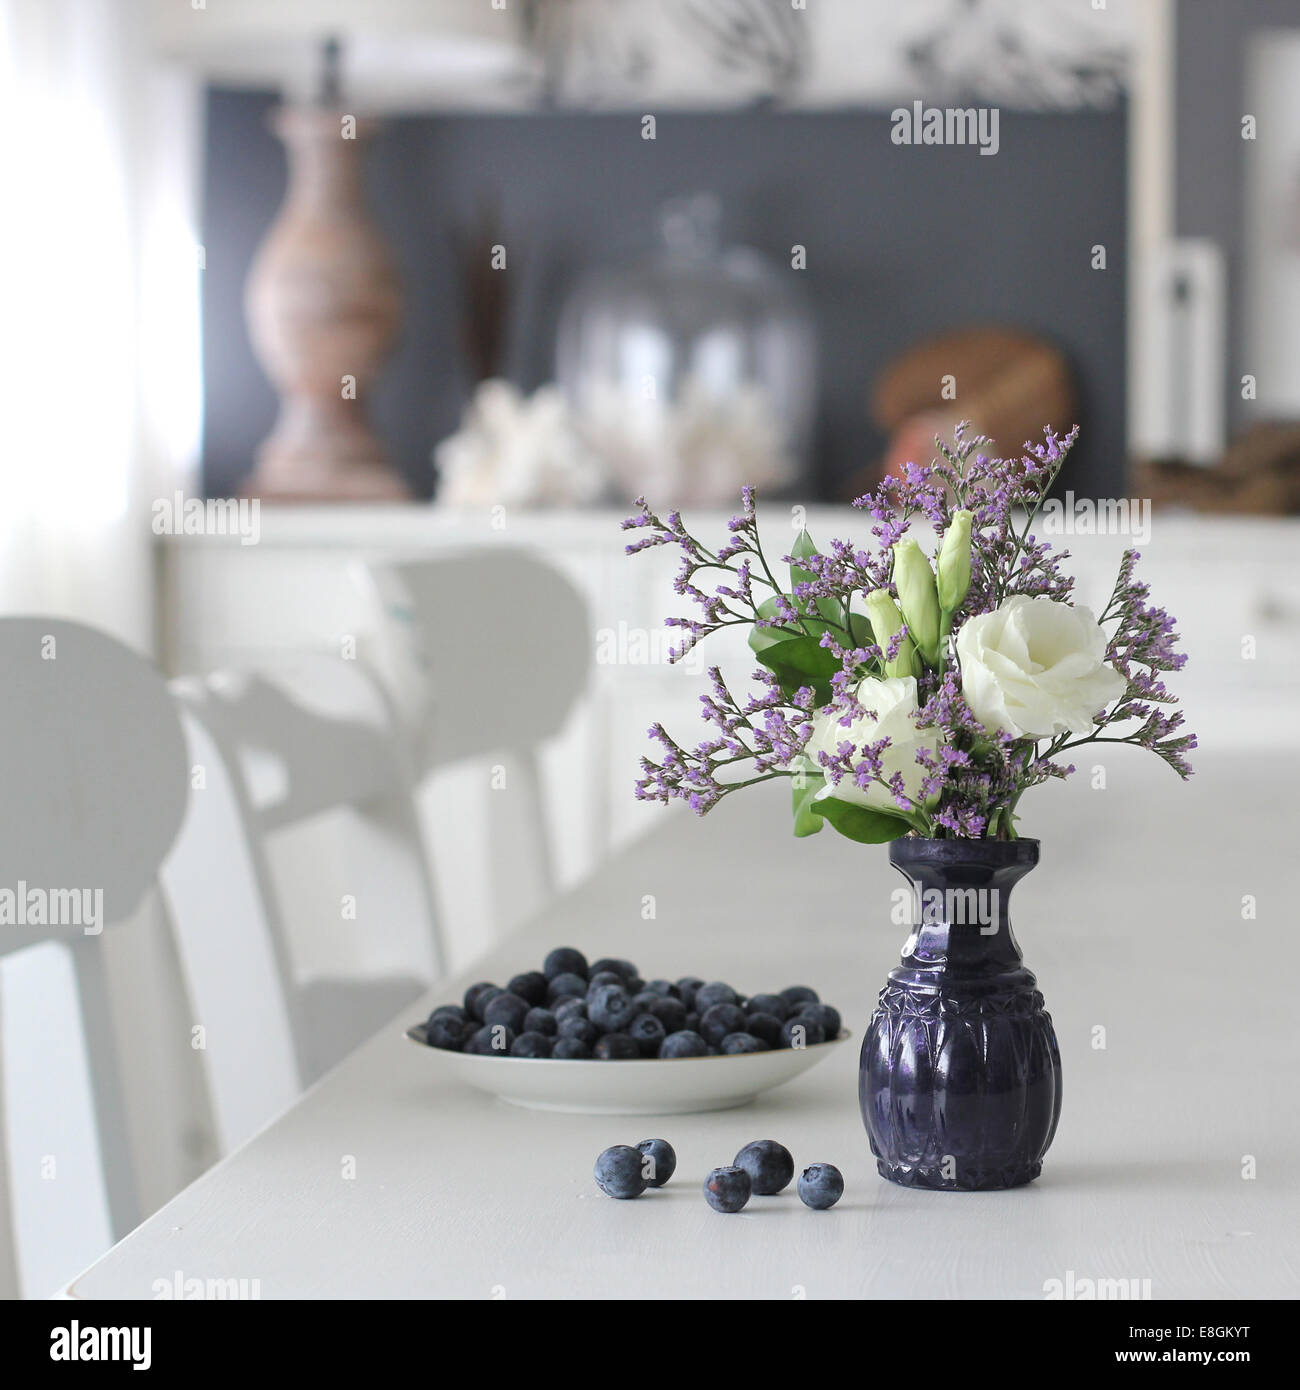 Vase with flowers and bowl with blueberries Stock Photo